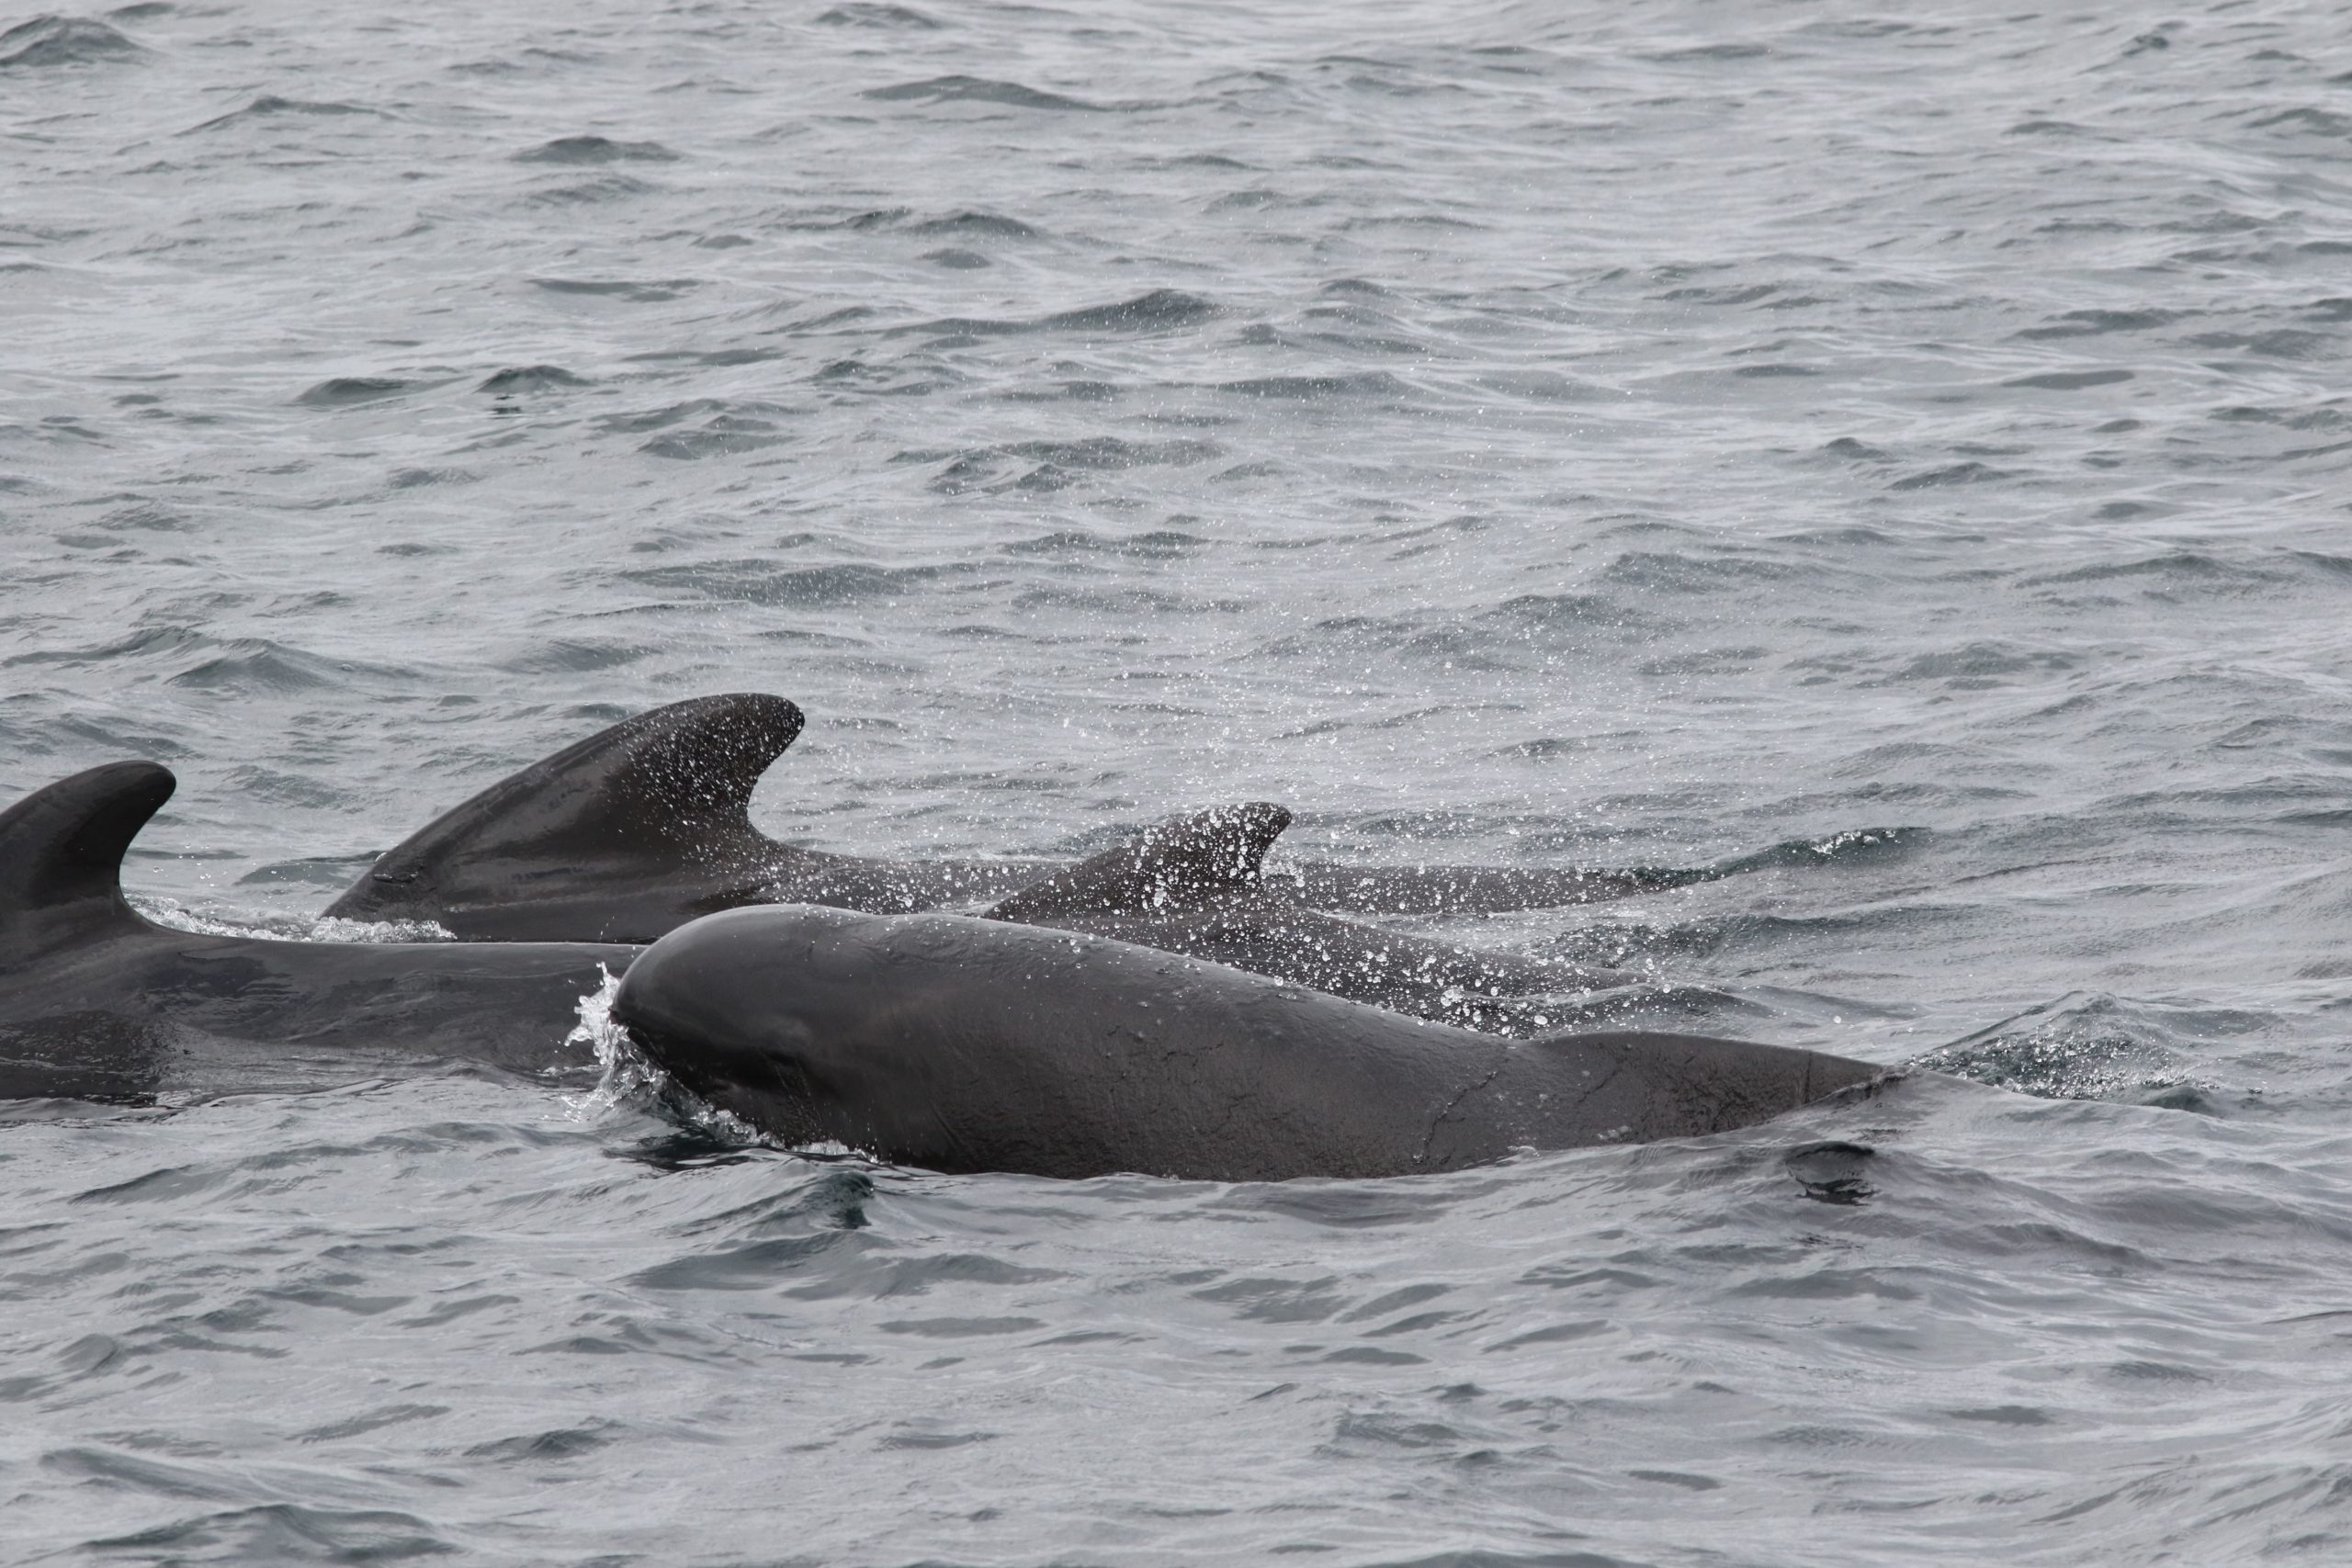 Four pilot whales surface in the north Atlantic waters by Oshan Whale Watch